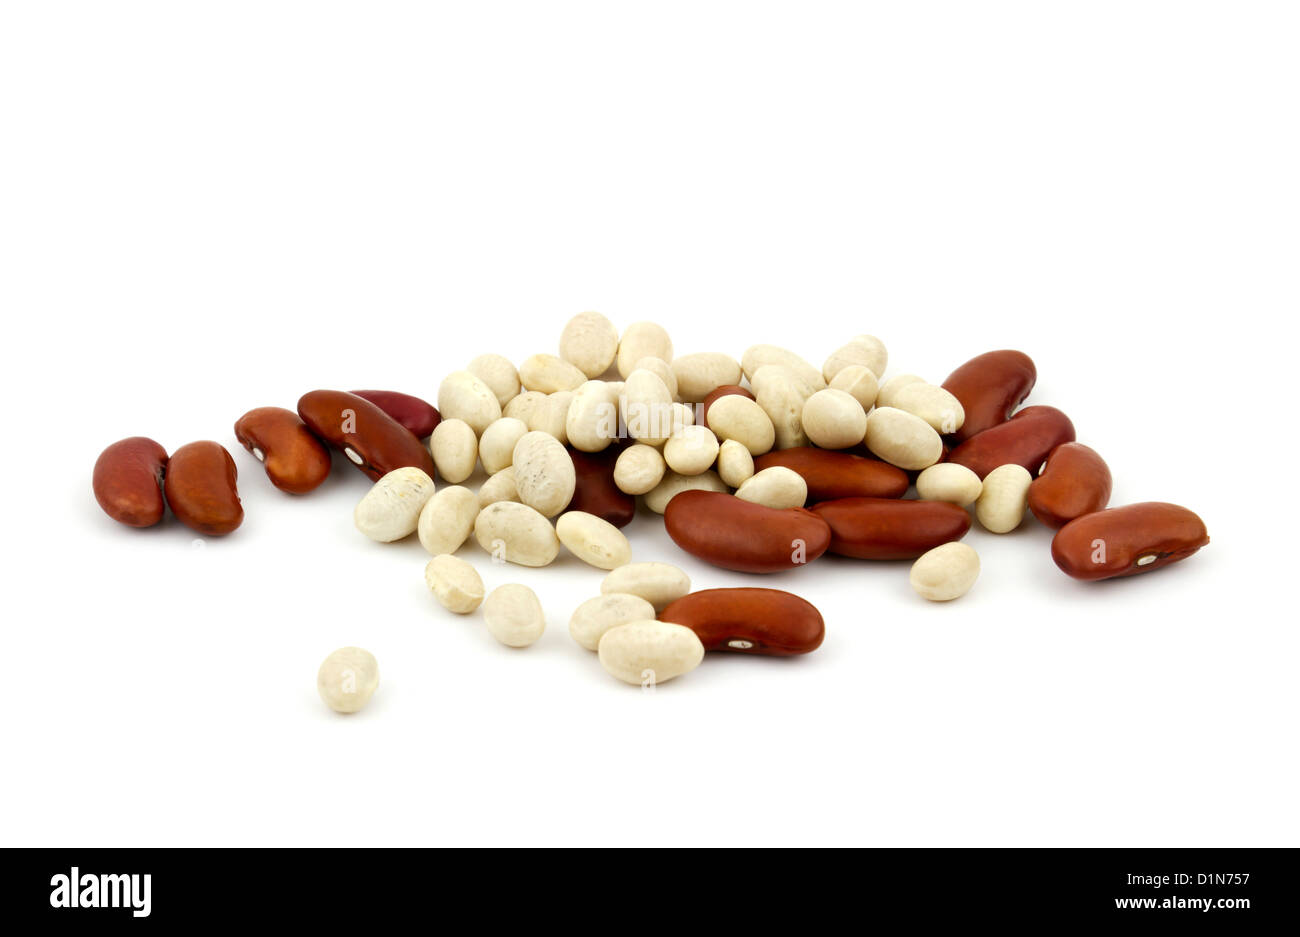 Assortment of navy and red kidney beans on white background. Stock Photo